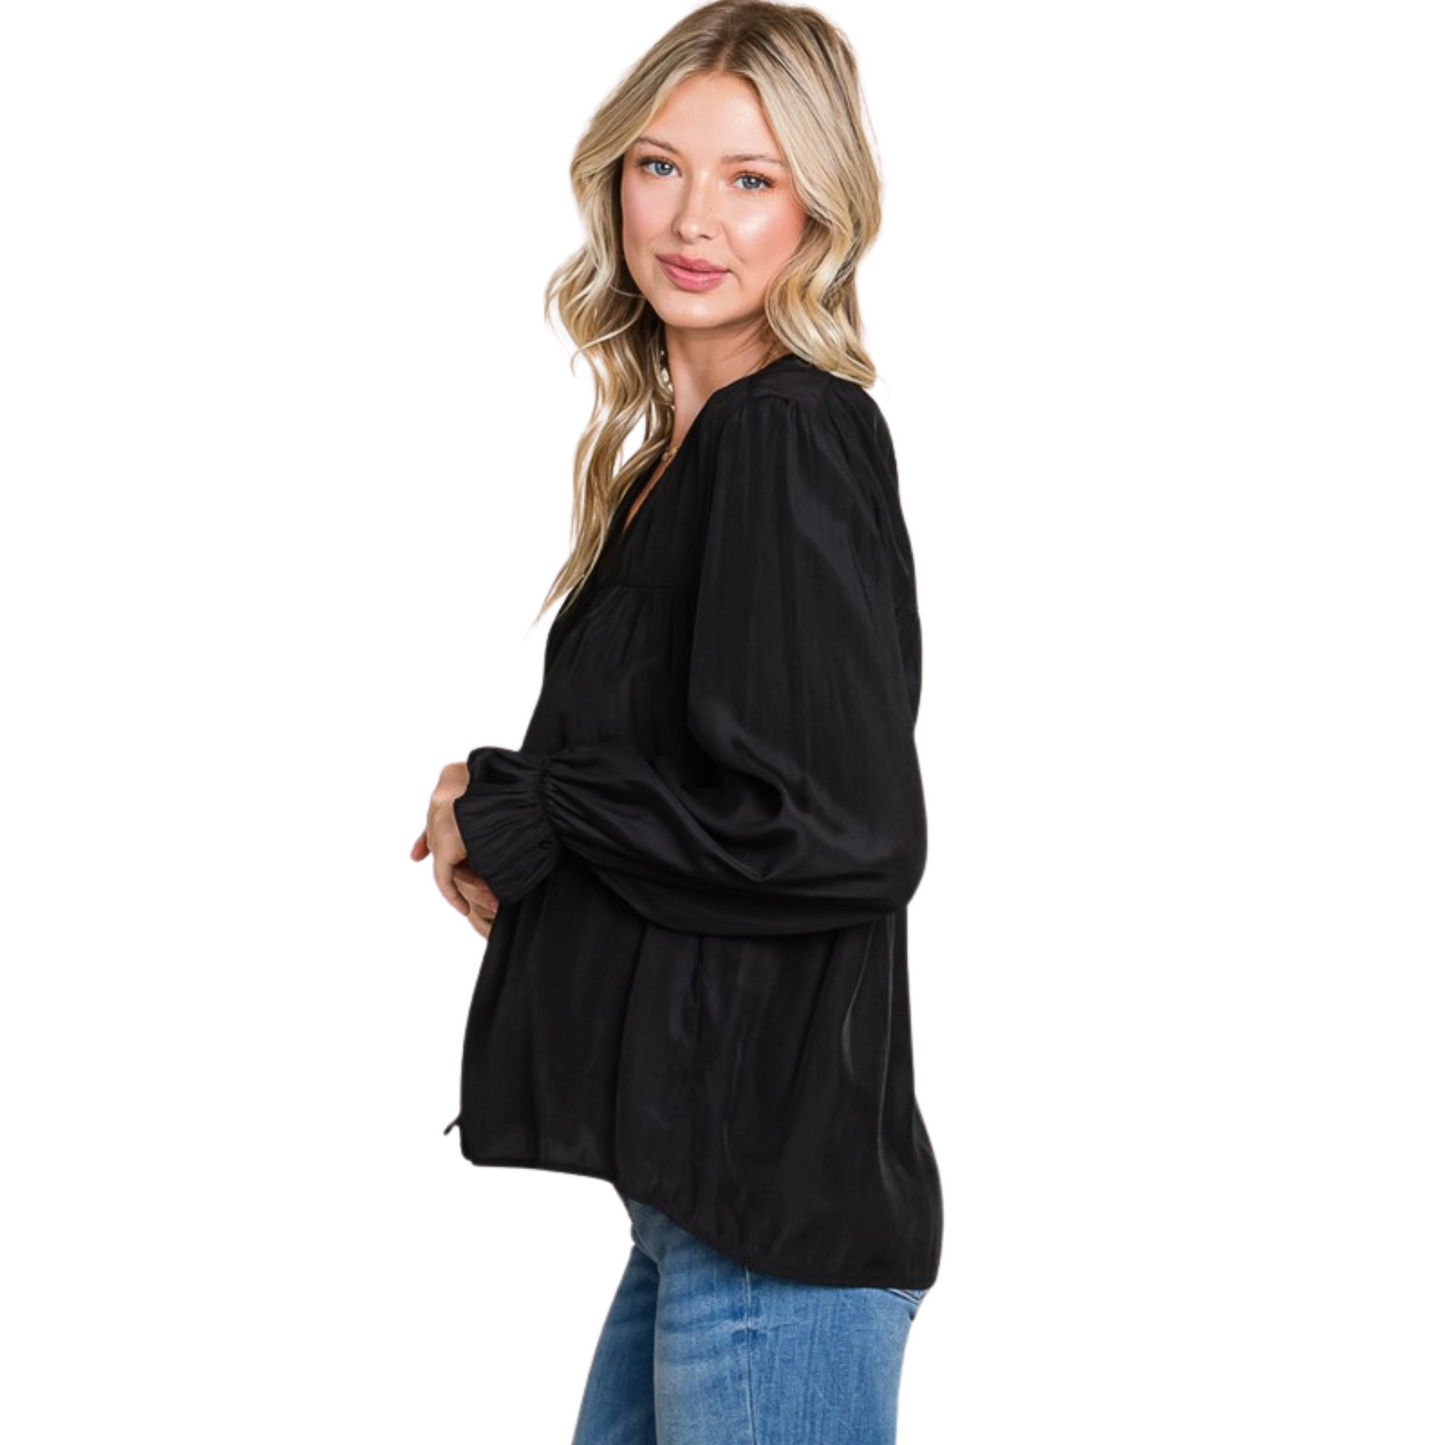 This Long Sleeve Button Down Top not only provides a classic and professional look, but also an easy accessibility to any outfit. Made from lightweight material, it comes in two colors, sage and black, making it an easily matching option in any wardrobe. It features a flattering v neckline and a button-down closure for the perfect finish.